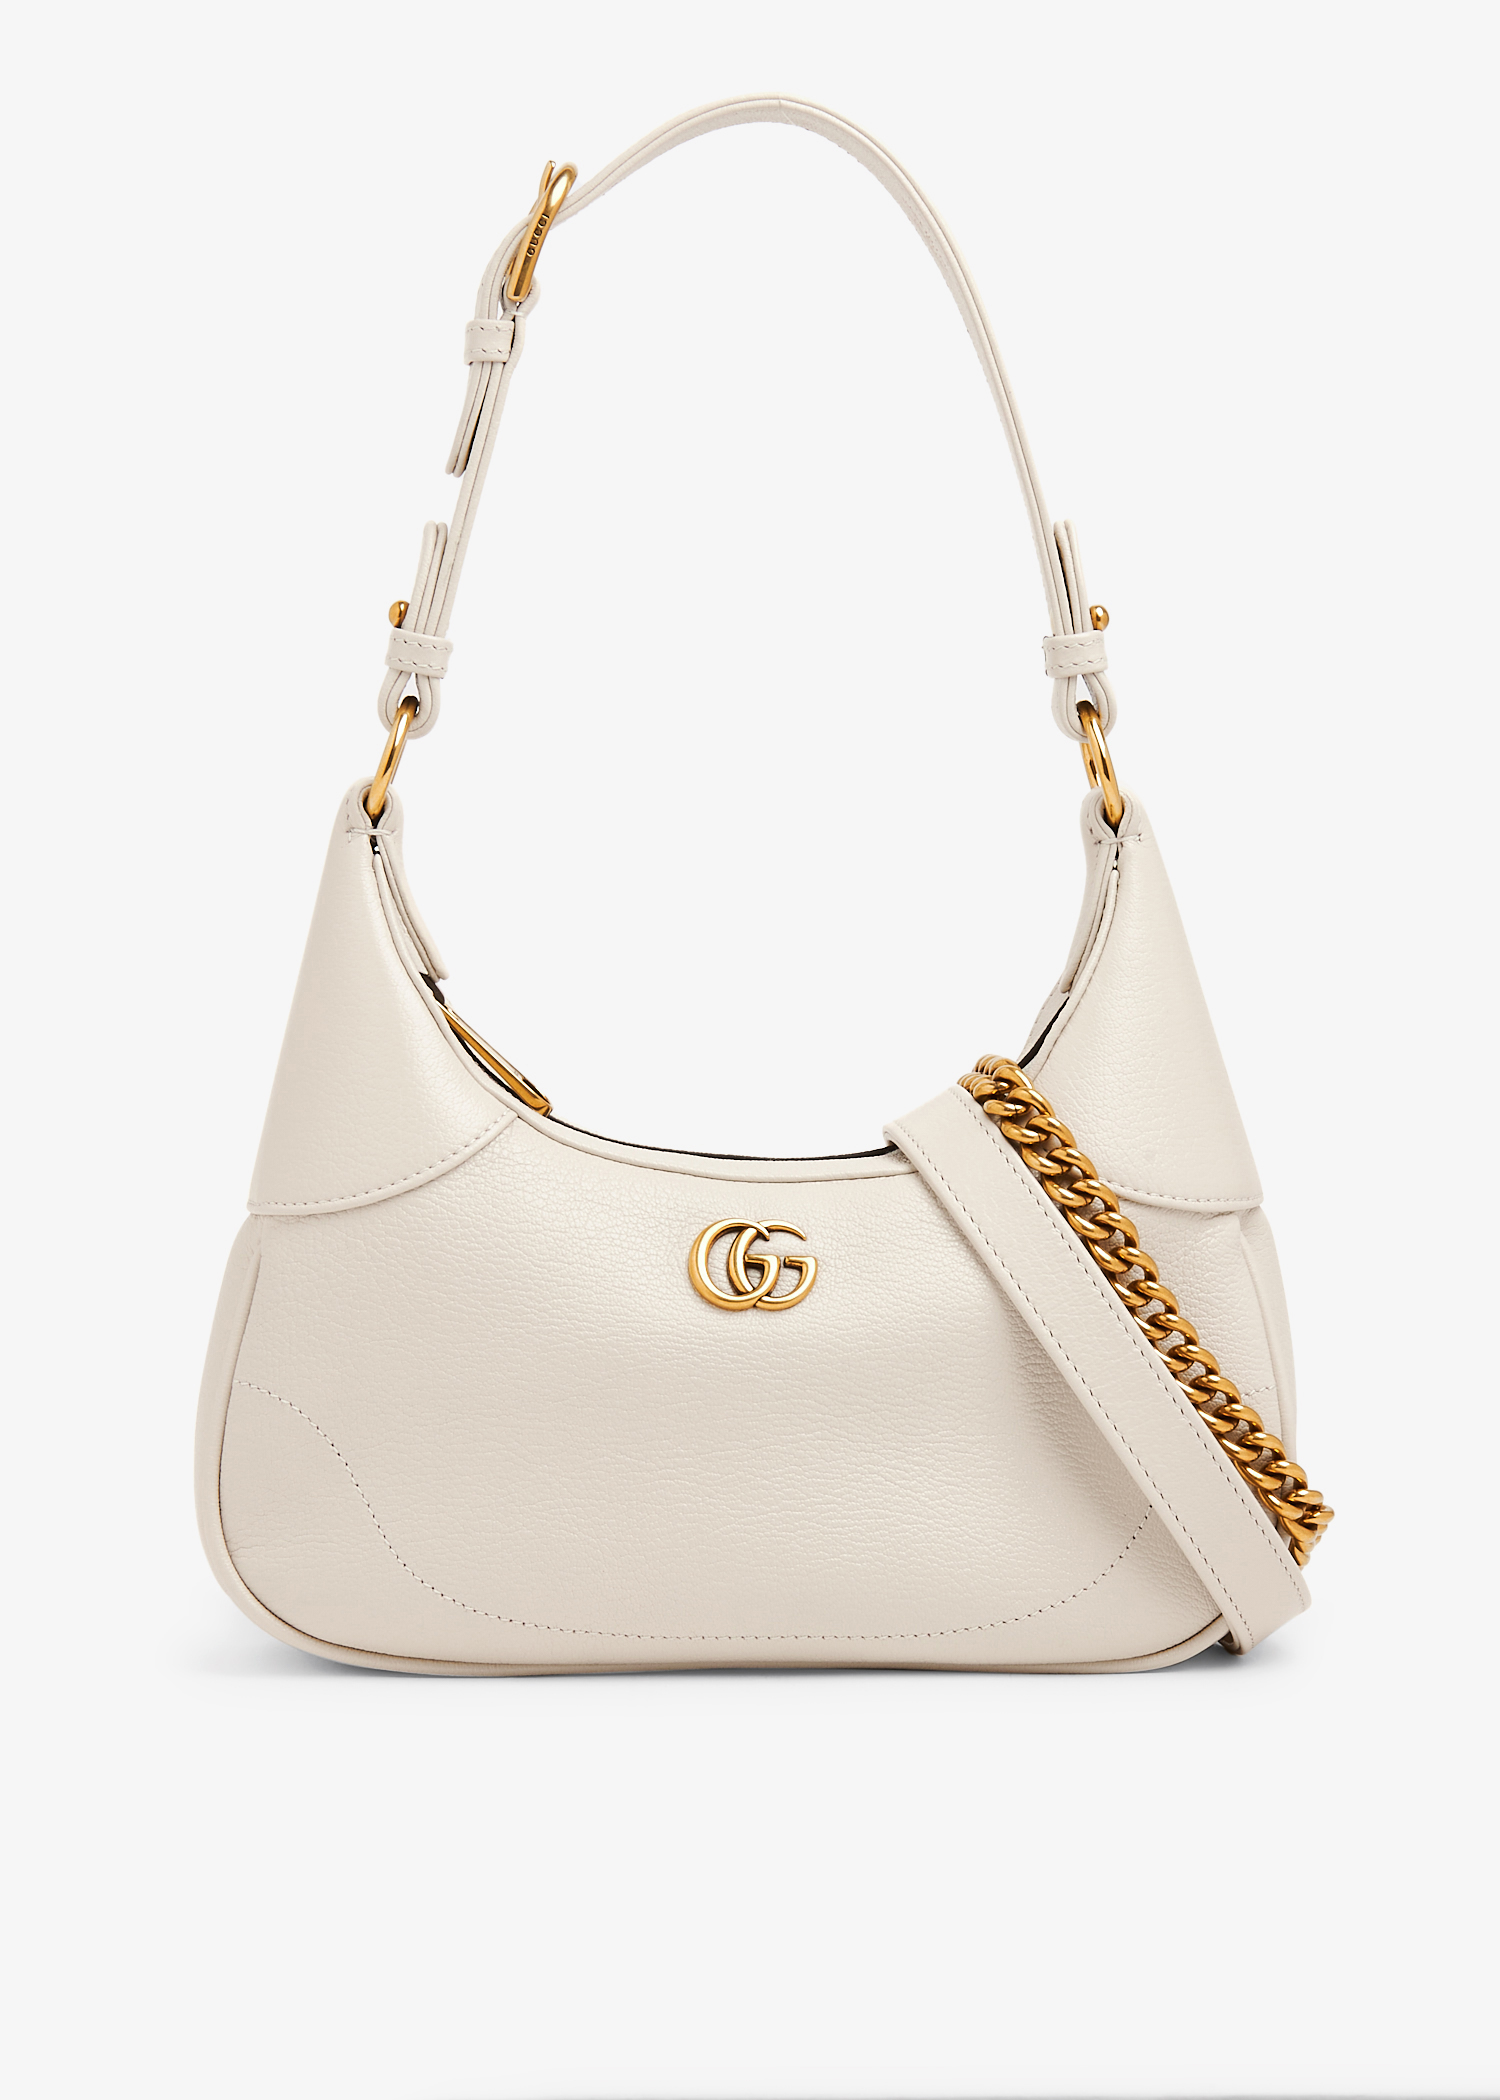 Shop authentic Gucci GG Patent Hobo at revogue for just USD 455.00